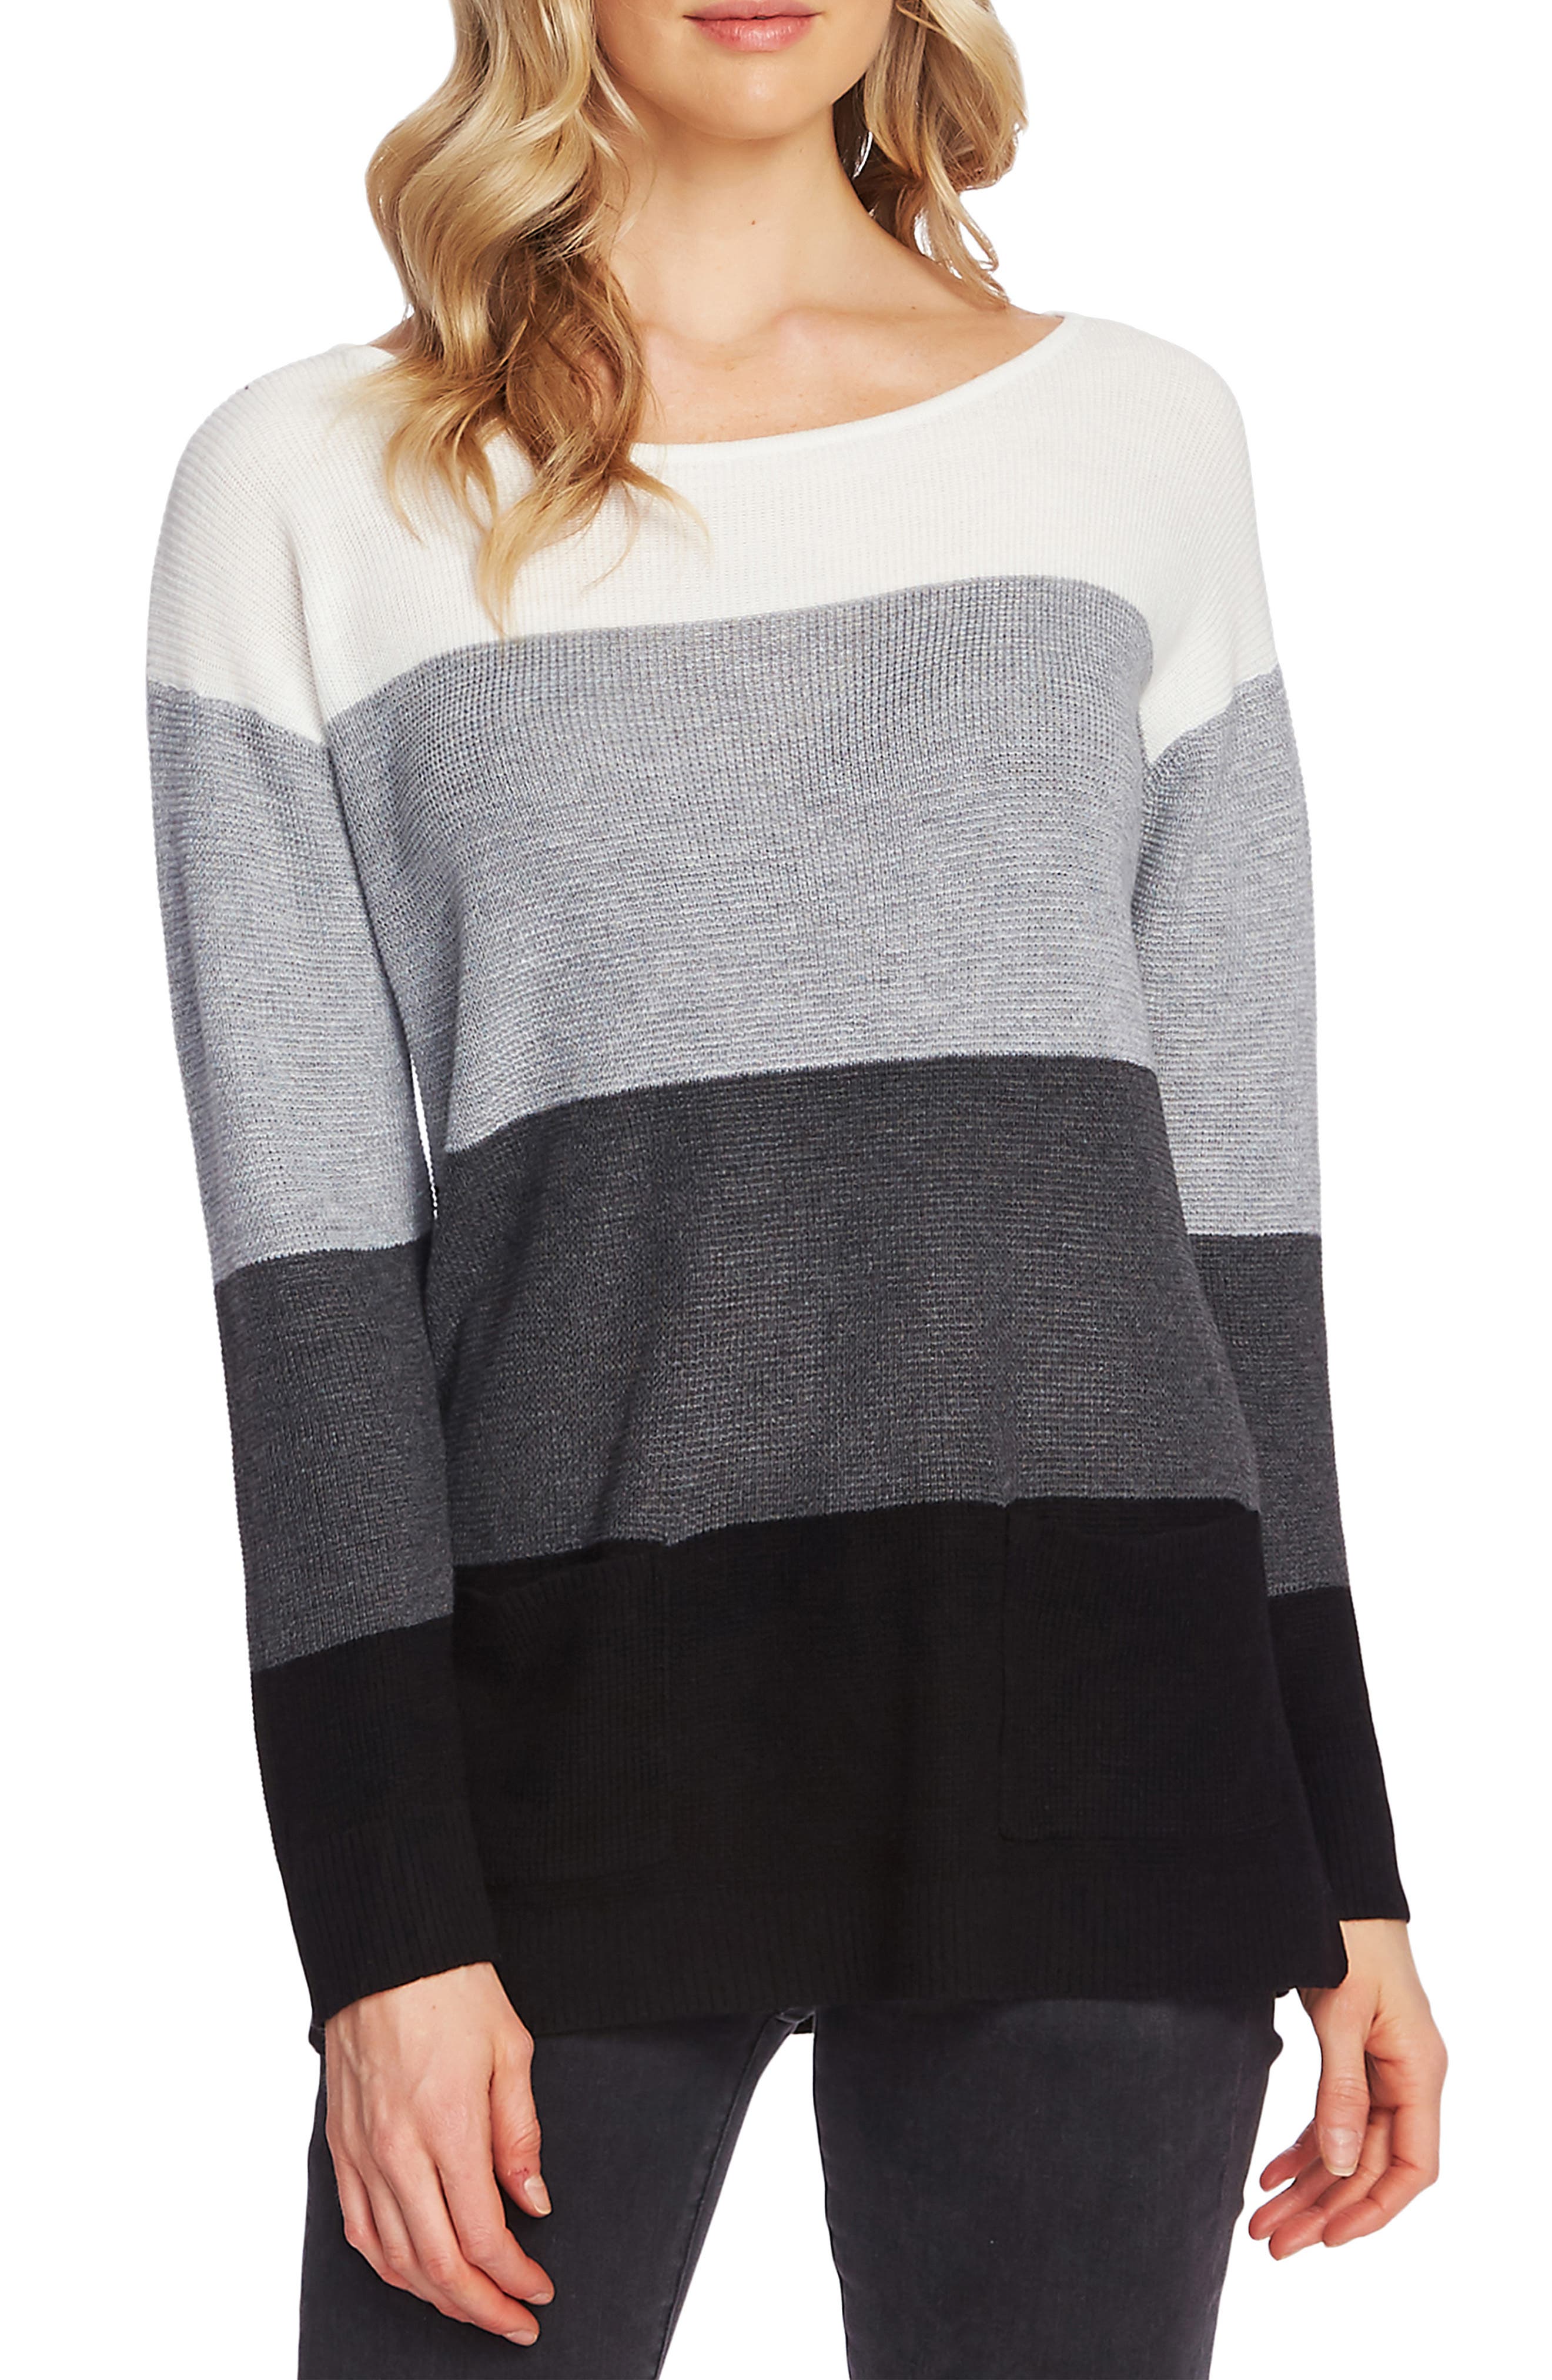 VINCE CAMUTO NEW Women's Striped Asymmetrical Sweater Top TEDO 